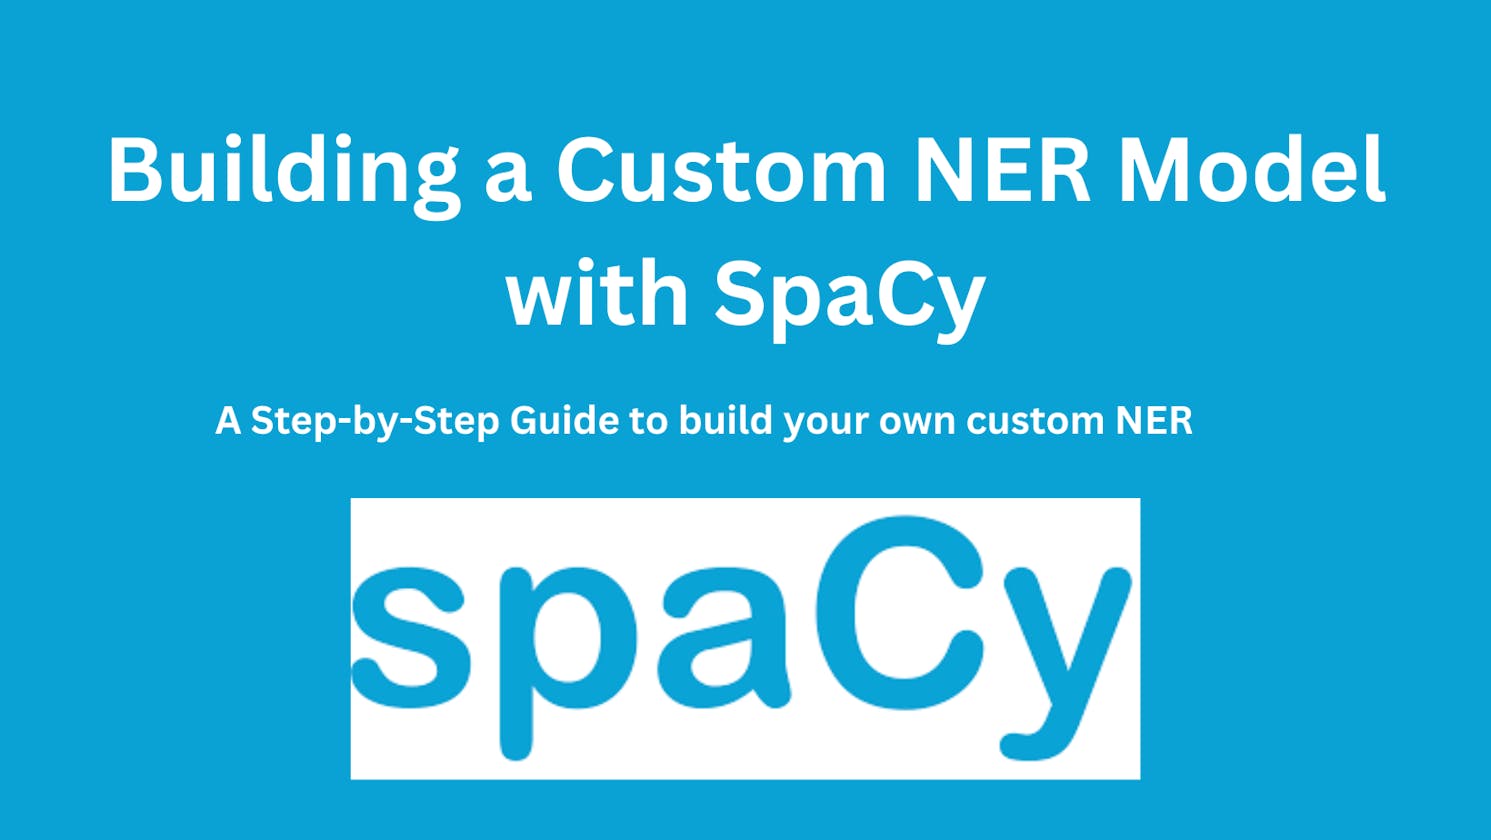 Building a Custom NER Model with SpaCy: A Step-by-Step Guide